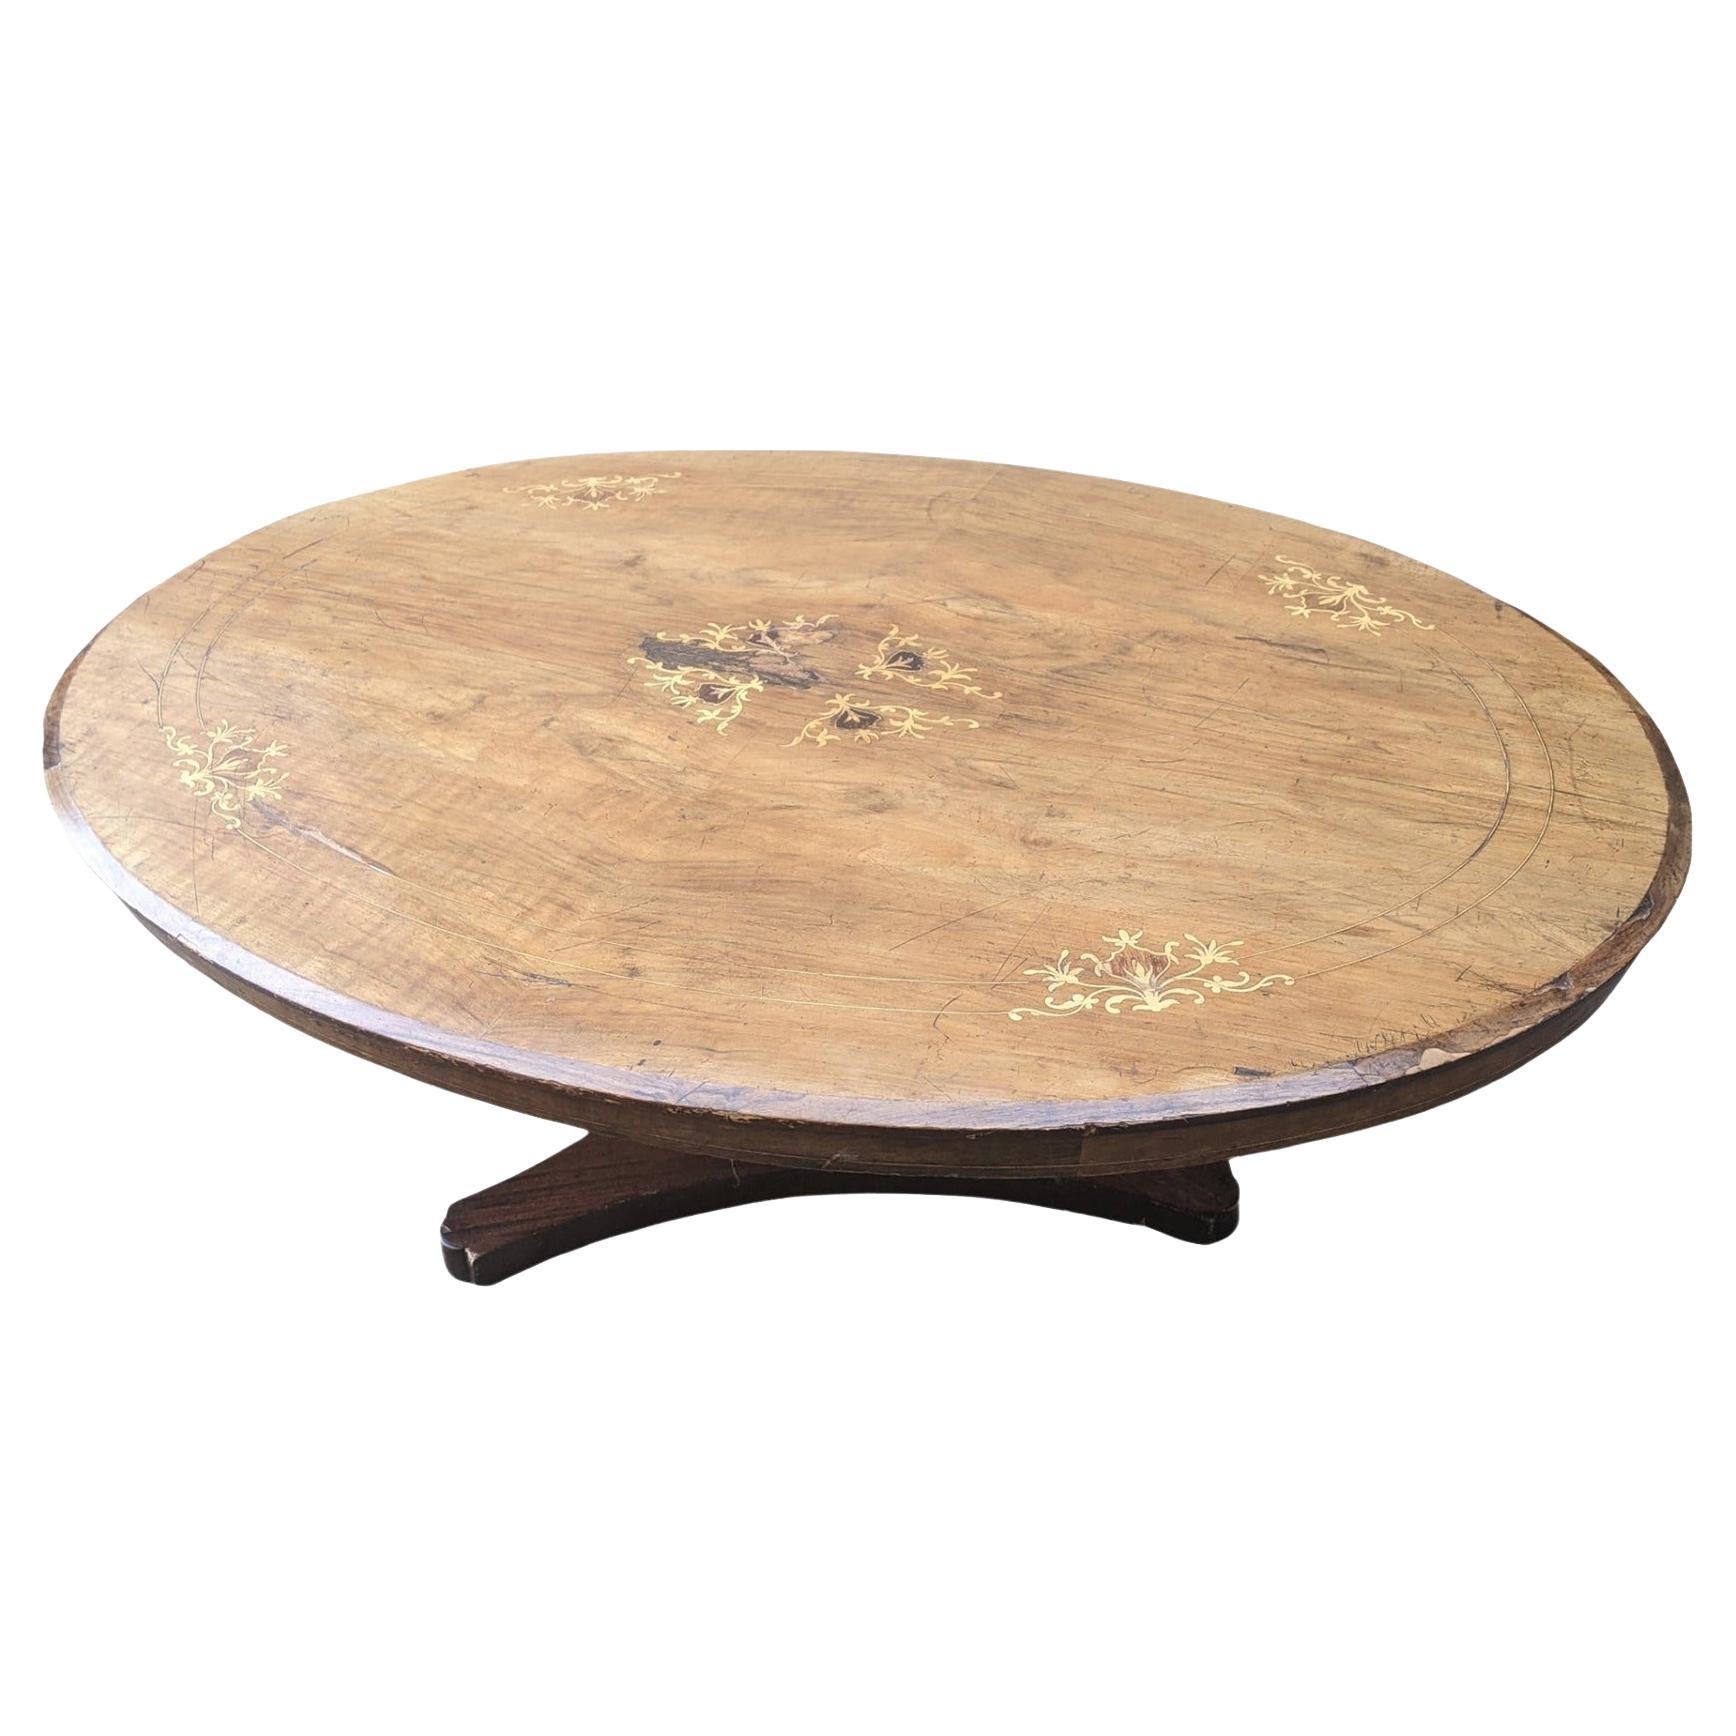 Late 19th Century Antique Hybridized Inlaid Victorian and Empire Coffee Table For Sale